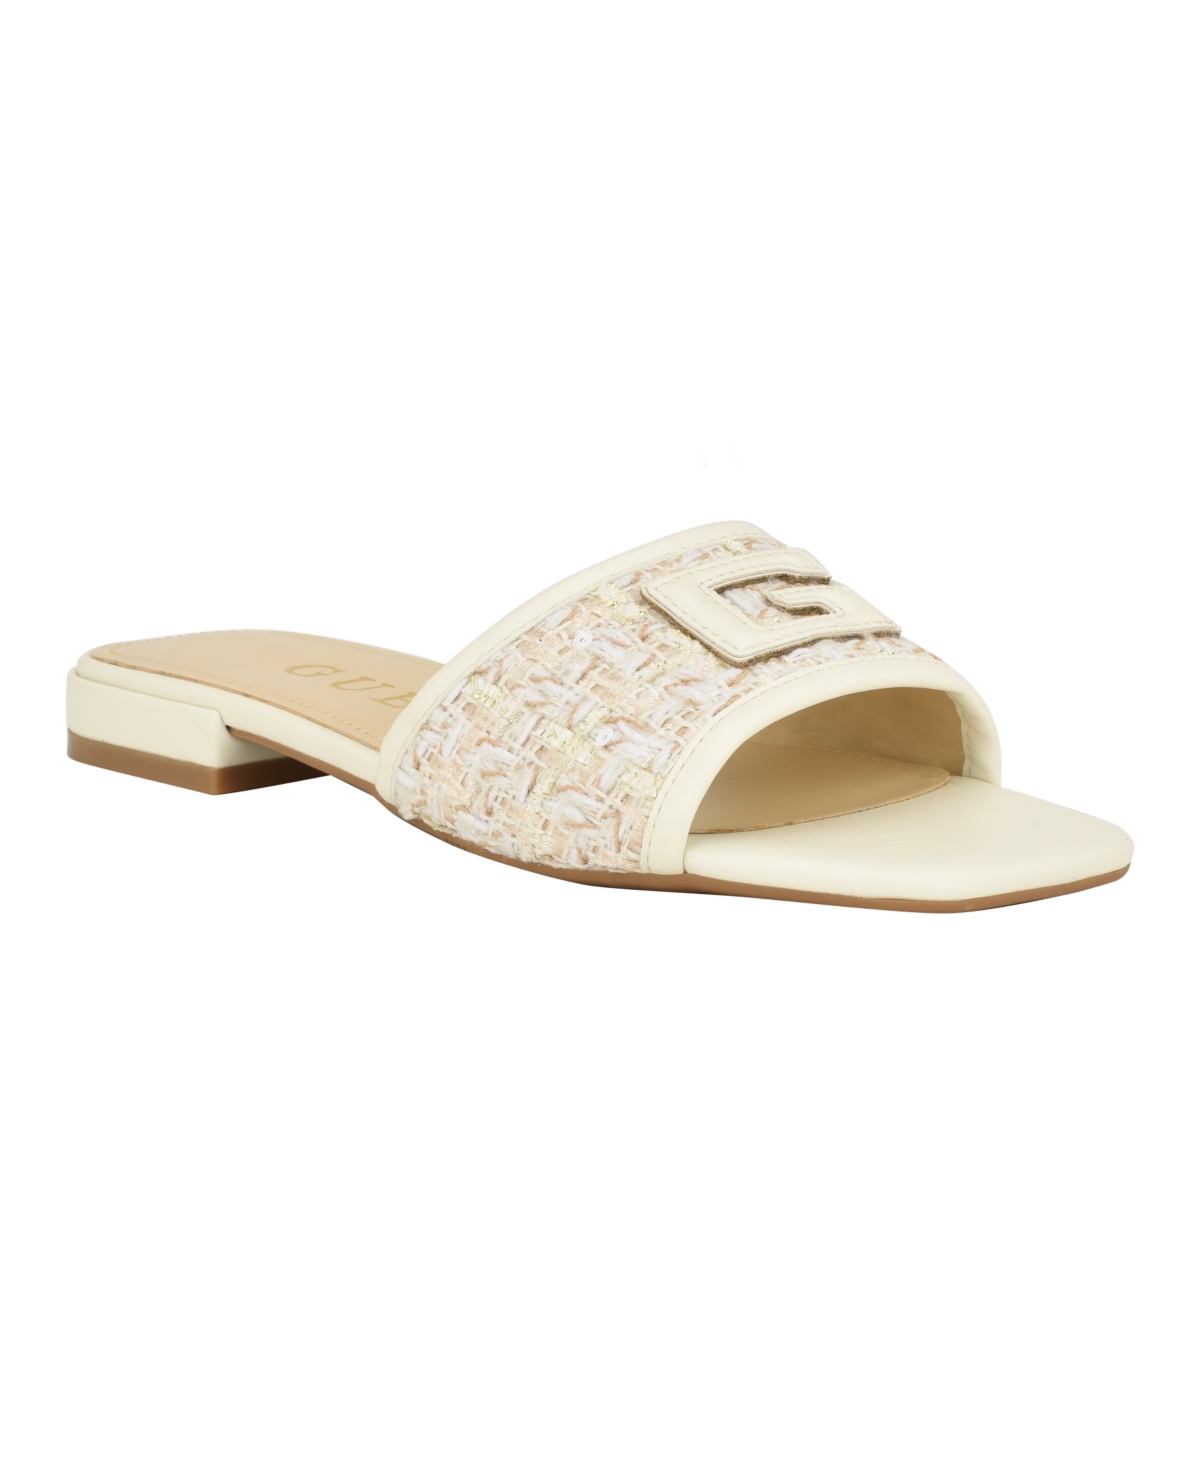 Women's Tampa Slide-On Sandals with Woven Logo Detail - Ivory